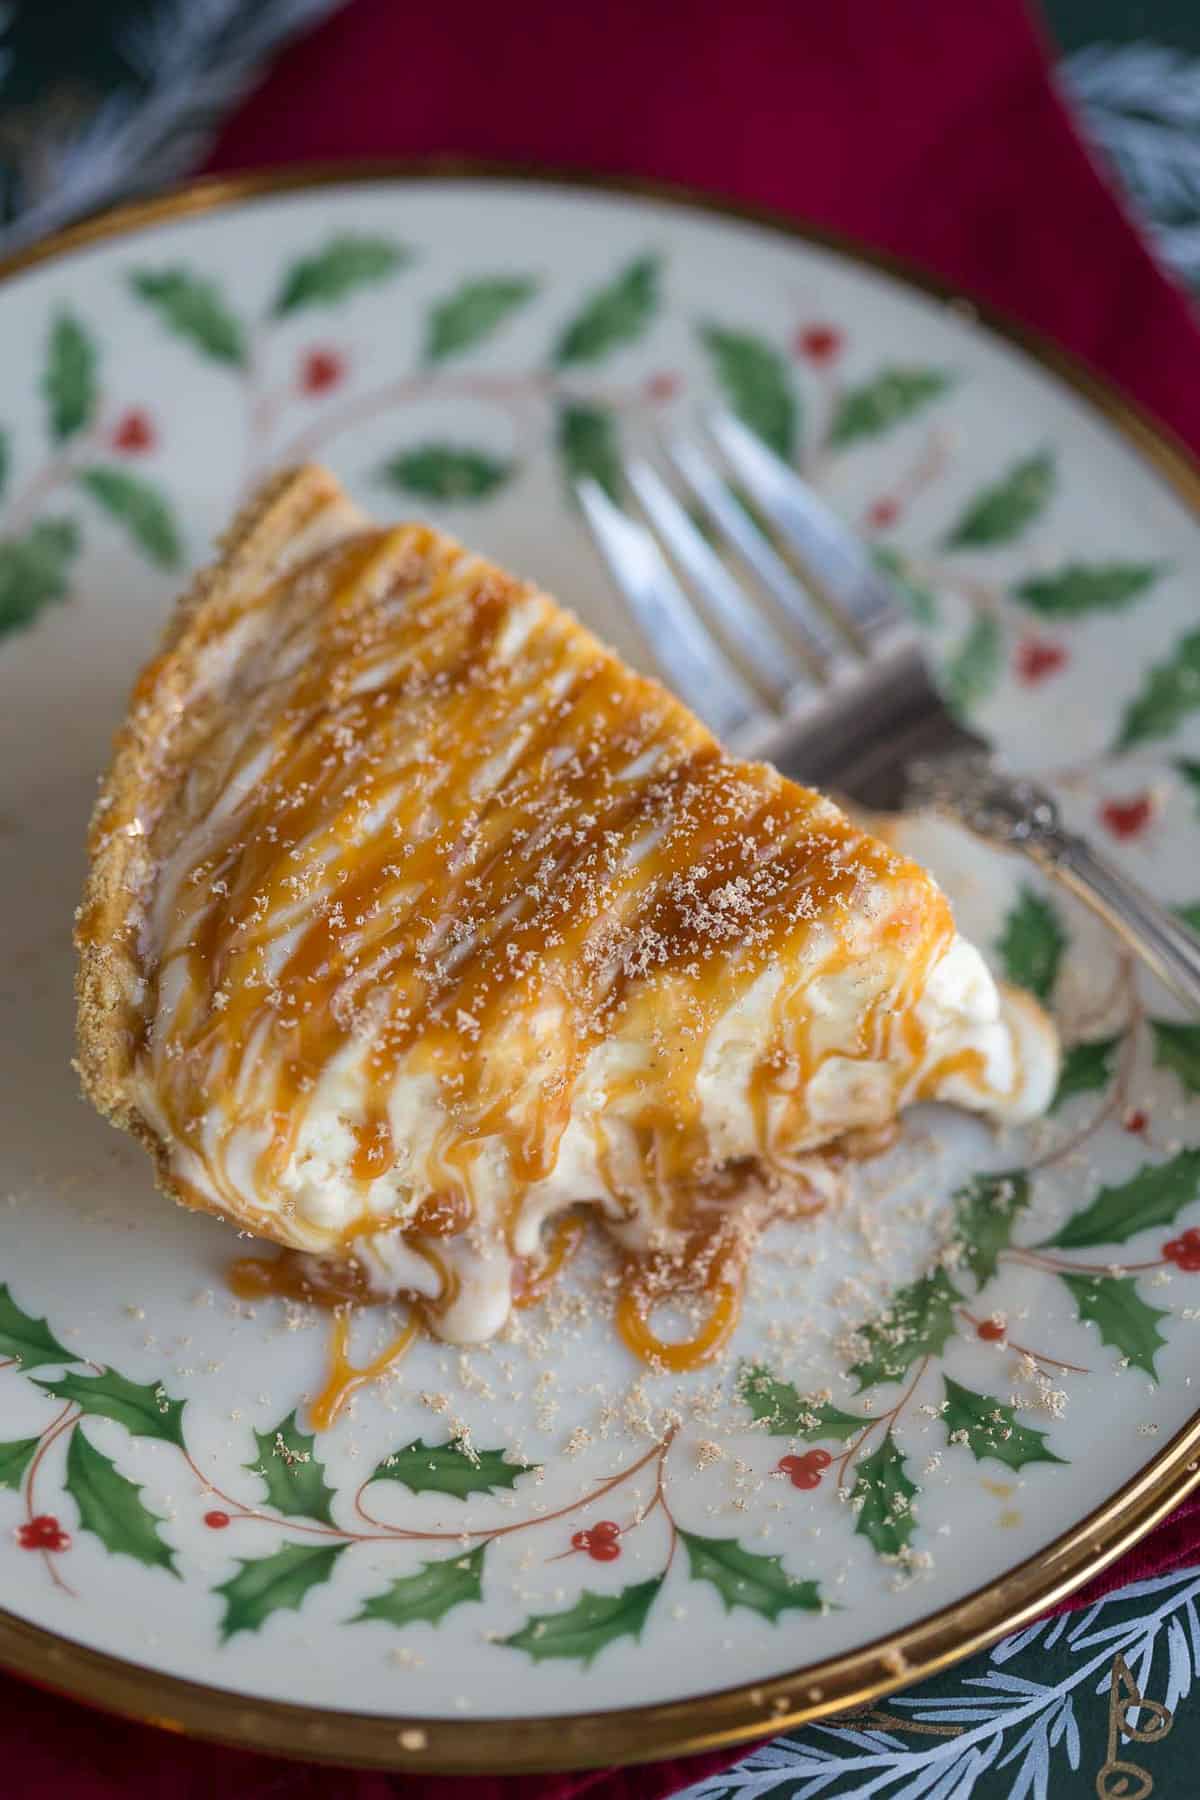 slice of eggnog pie drizzled with caramel and a fork on a decorative red and green plate.